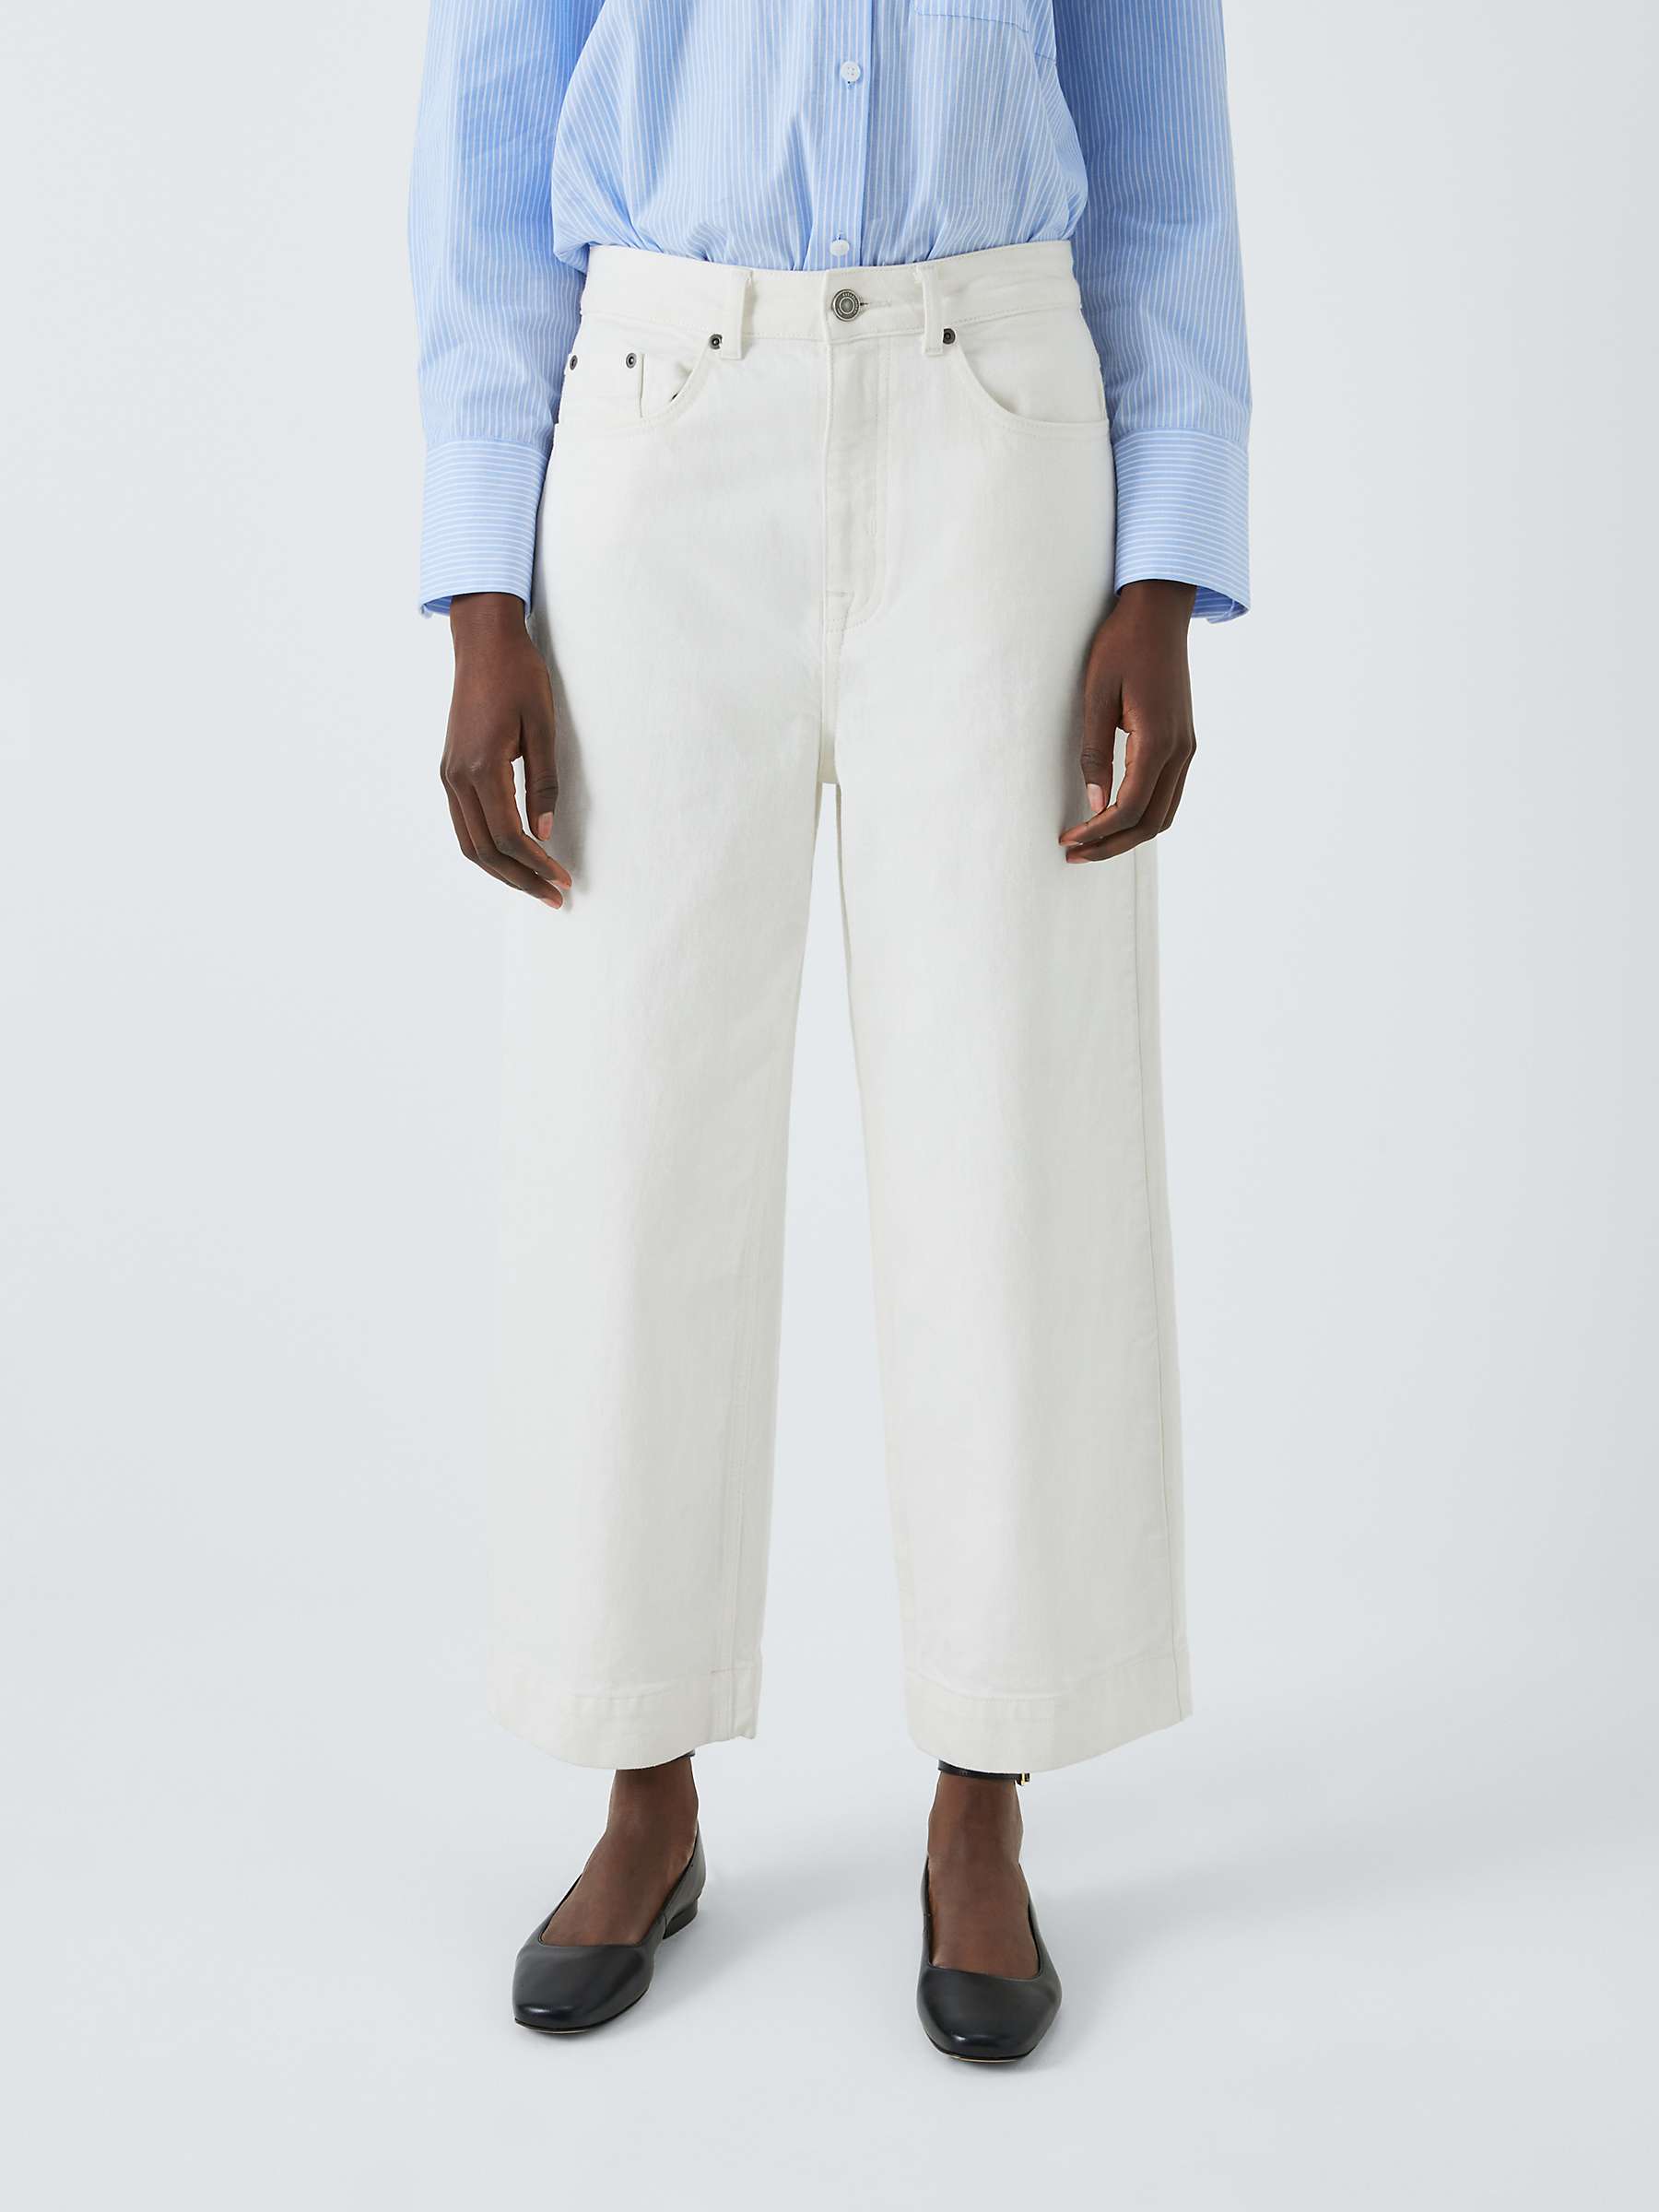 Buy John Lewis Premium Cropped Straight Fit Jeans Online at johnlewis.com